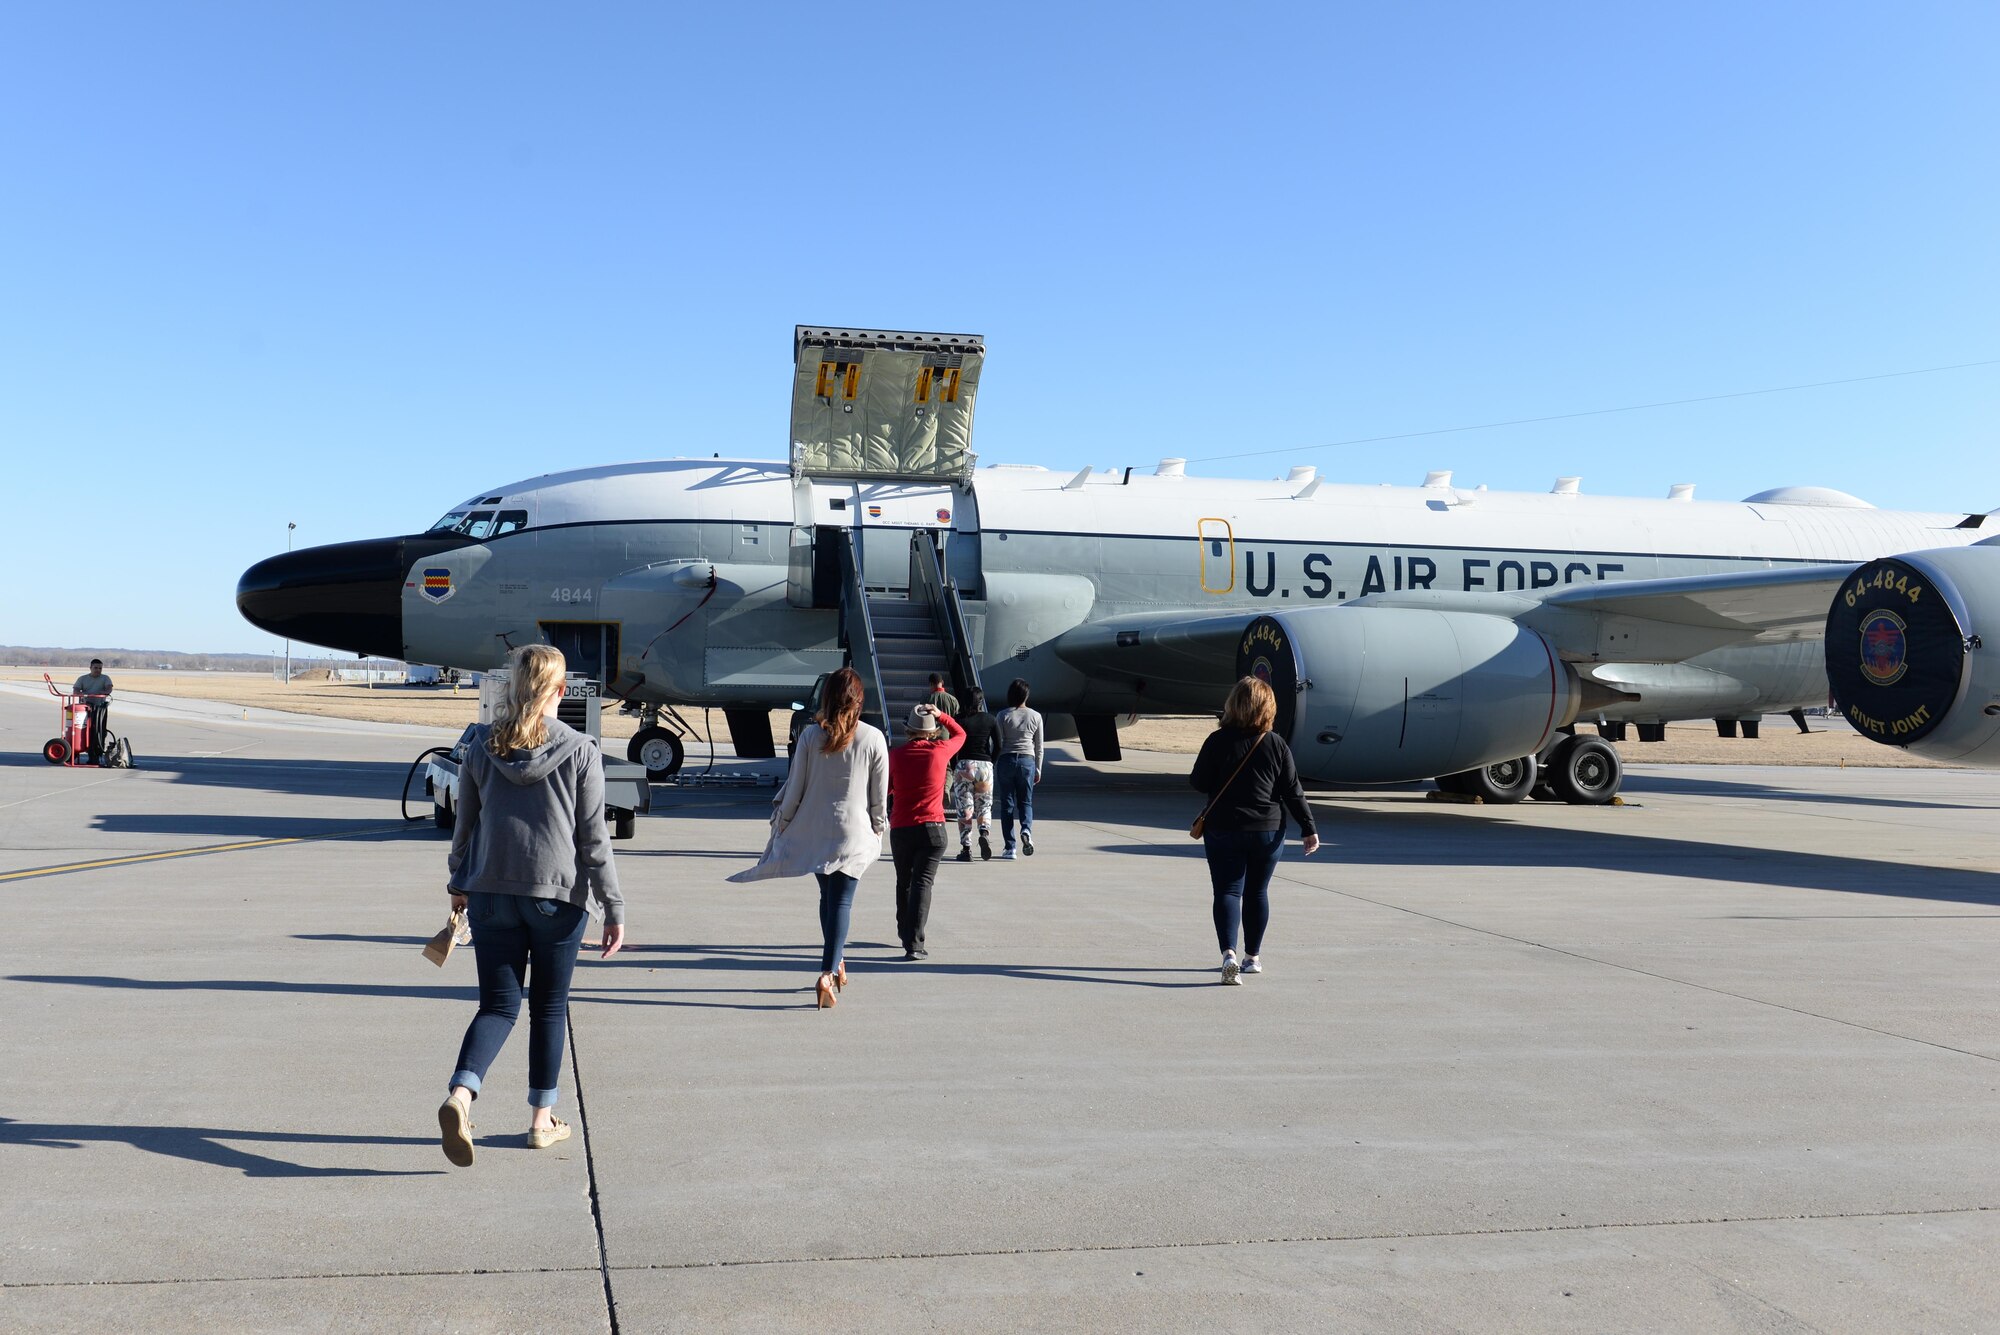 55th Maintenance Squadron spouses take a tour of an RC-135 Rivet Joint aircraft at Offutt Air Force Base, Neb., Feb. 17, 2017. Members of the 55th MXS had a chance to show their spouses what they do for the Air Force.(U.S. Air Force photo by Zachary Hada)